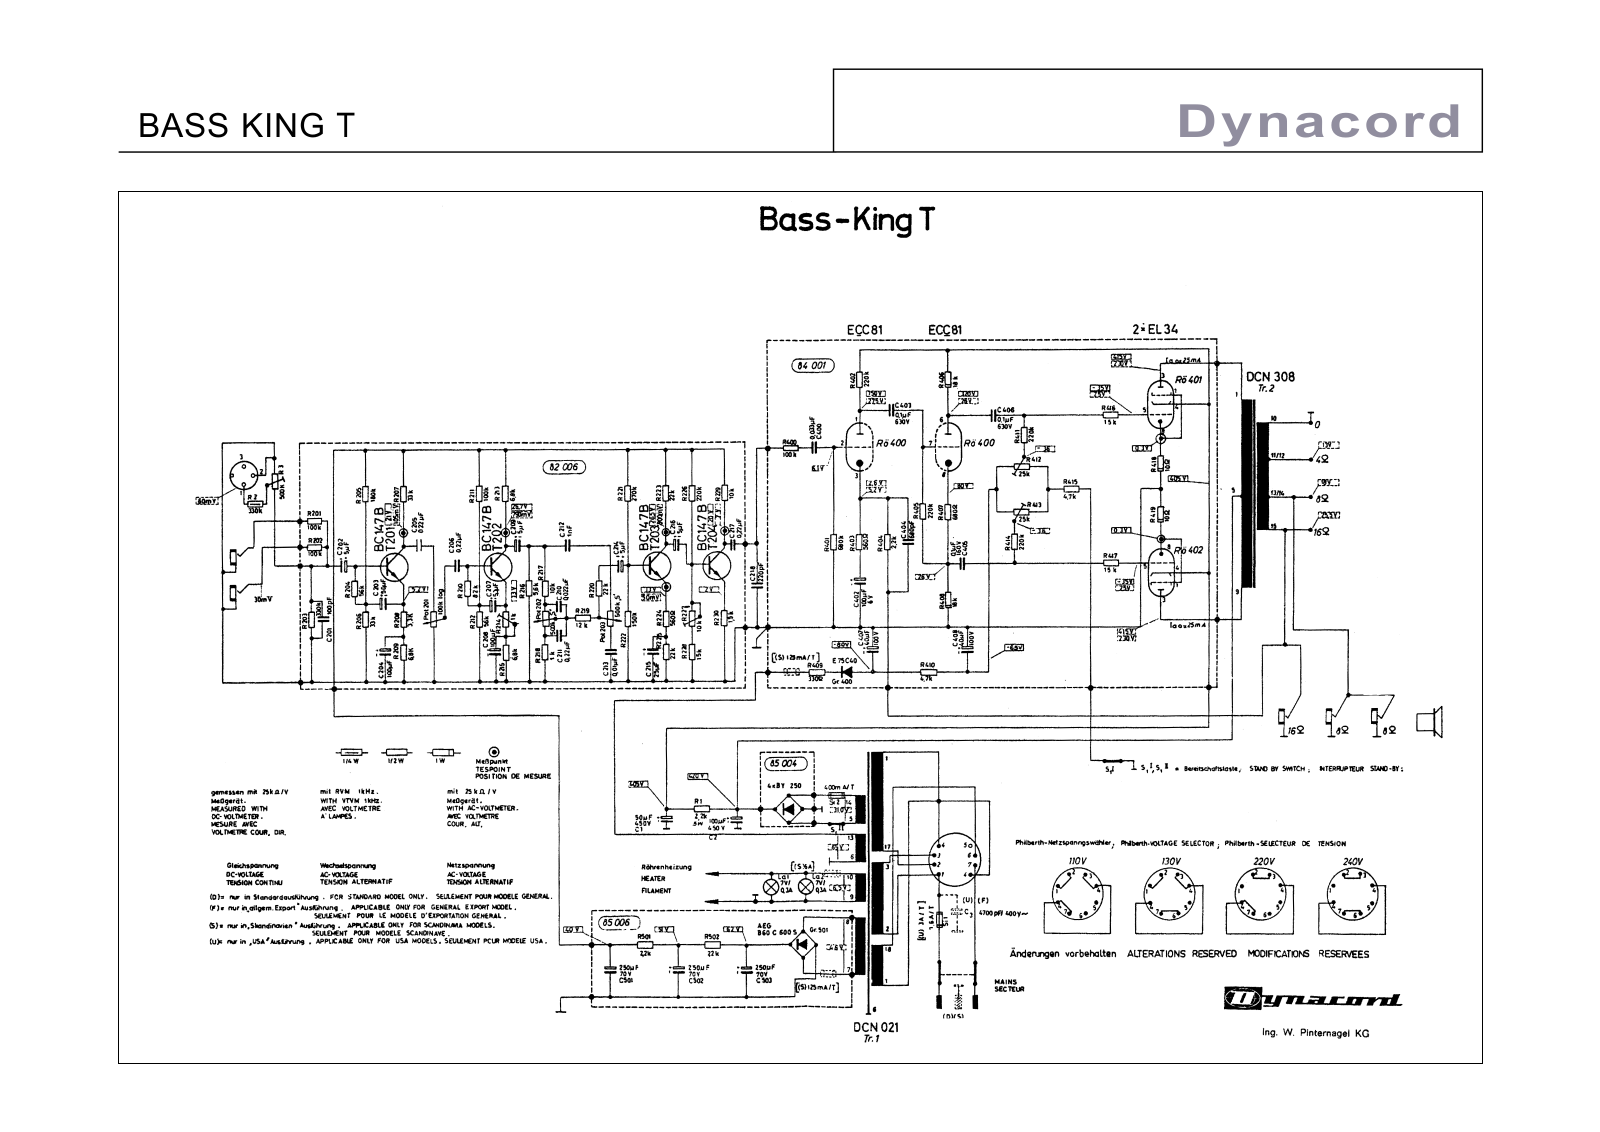 Dynacord bass king t schematic